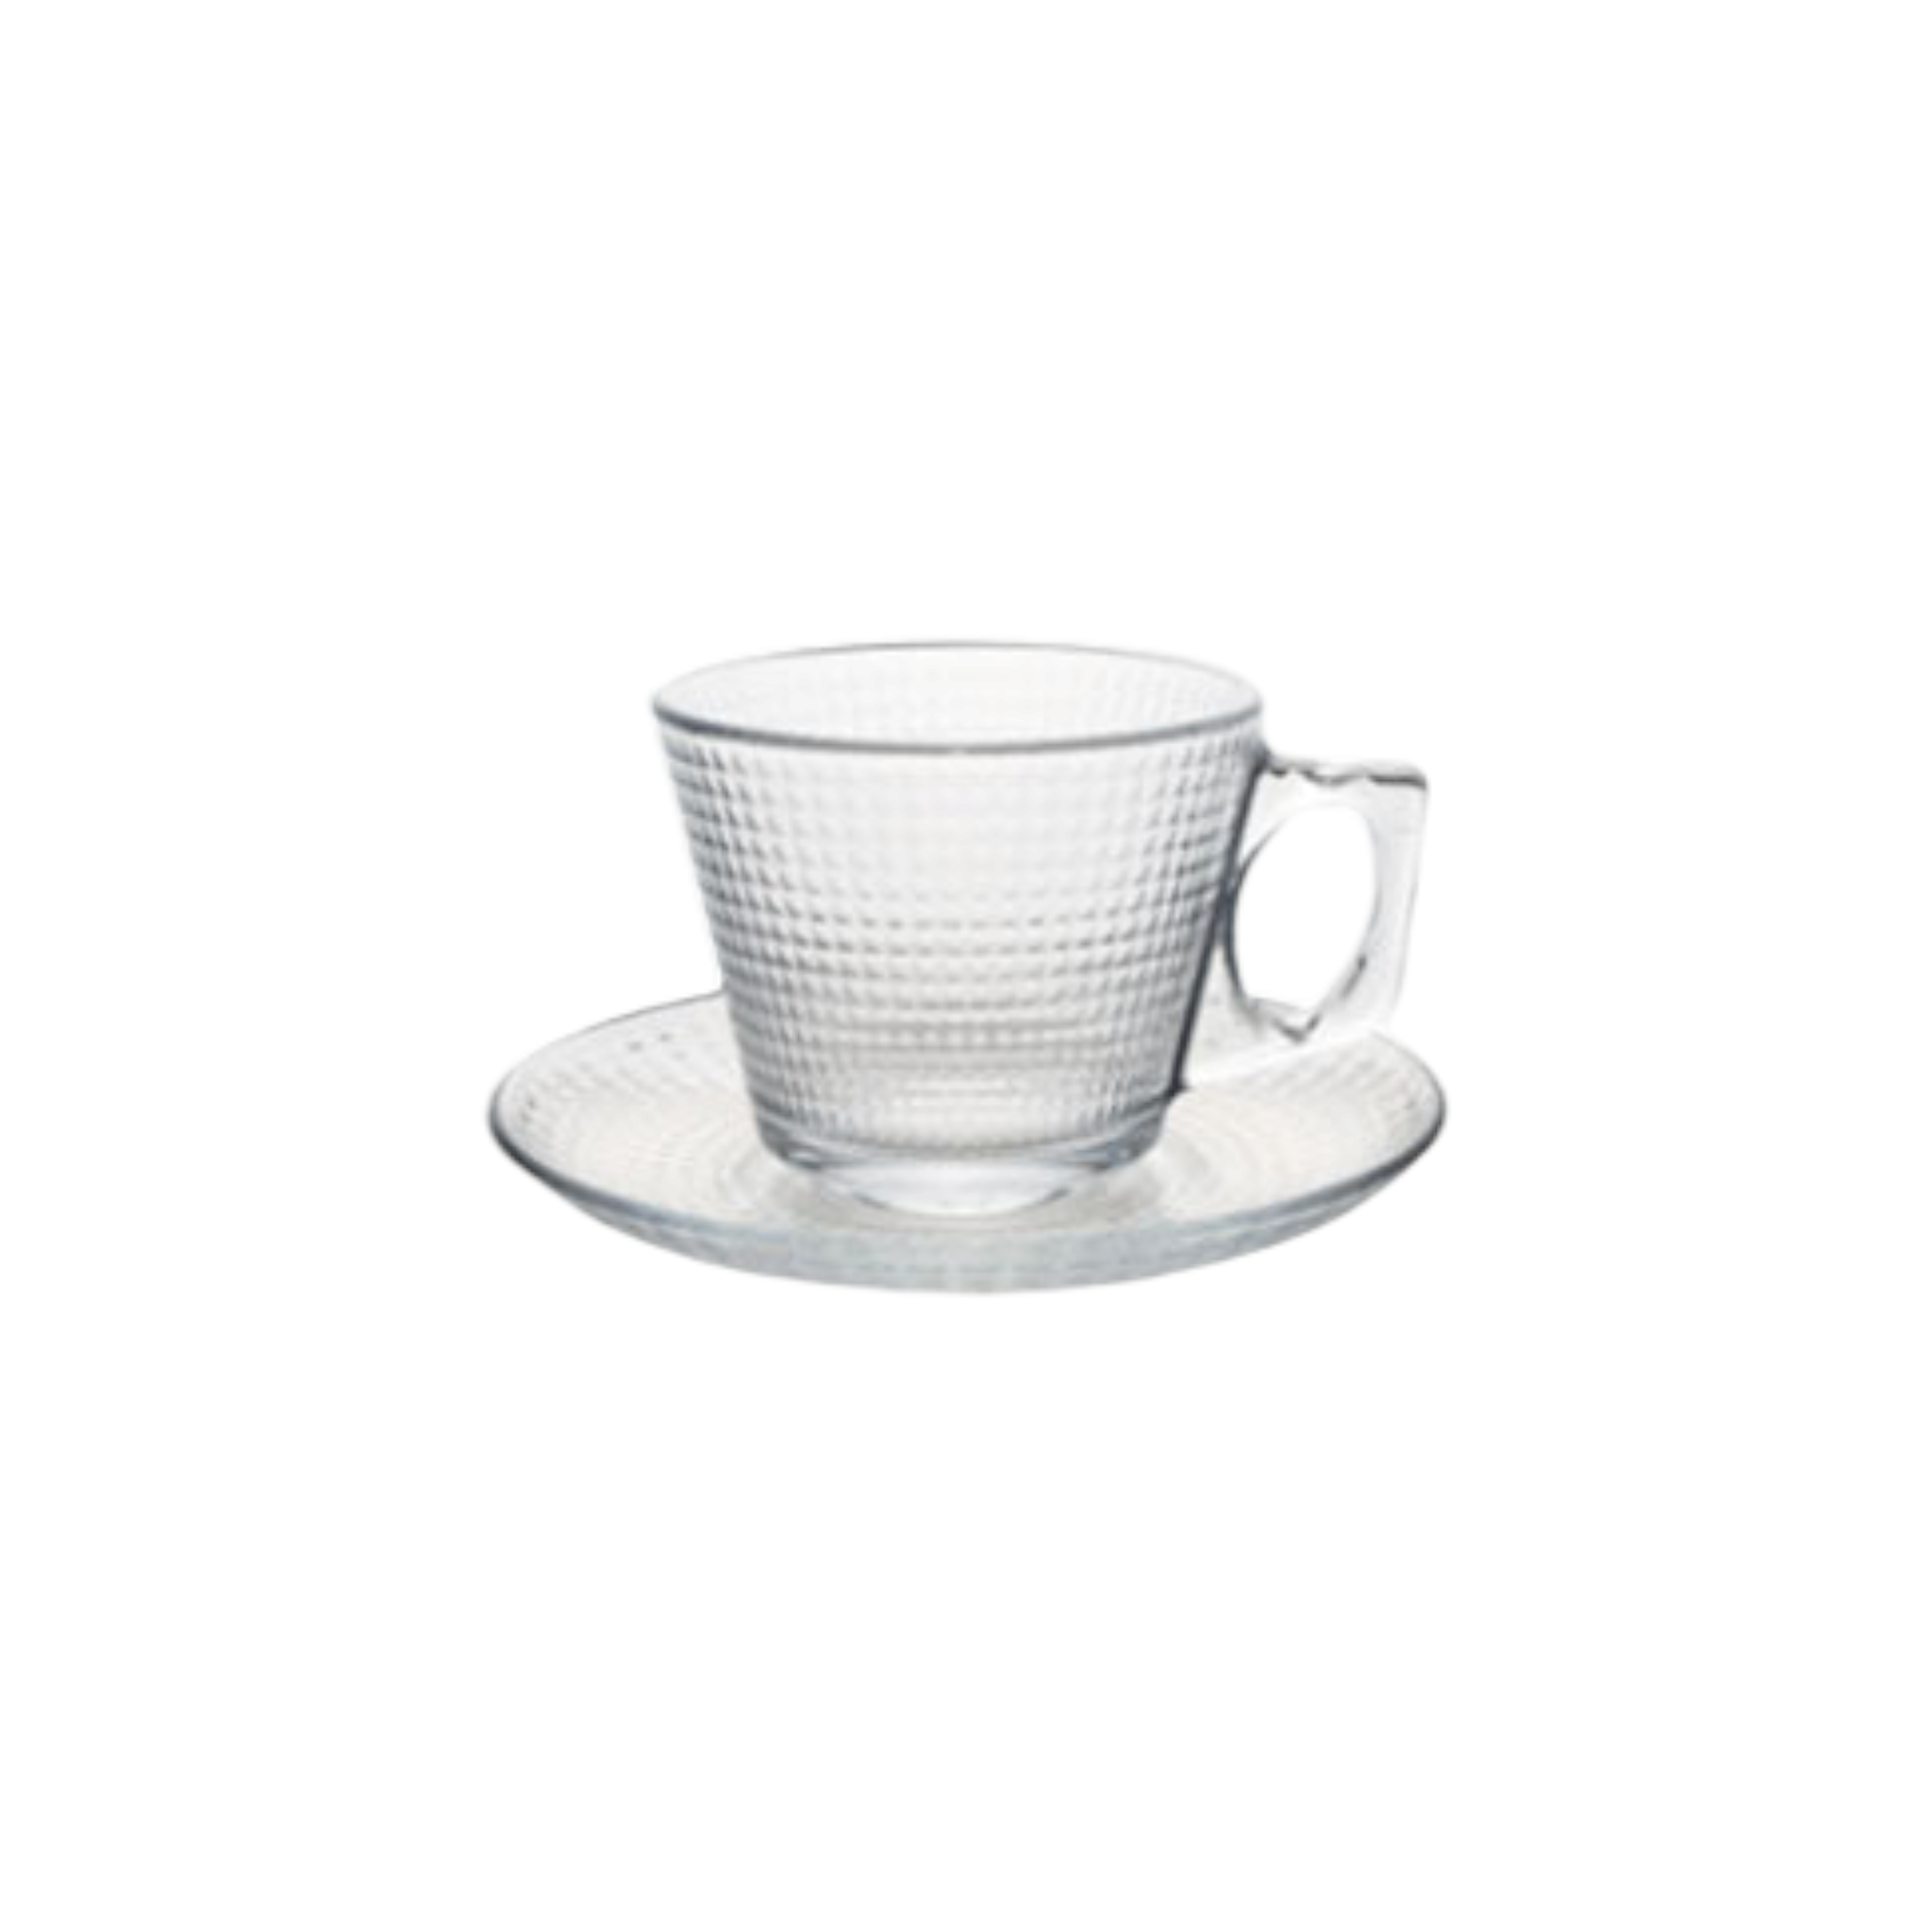 Generation Glass Cup and Saucer 6pcs 23858